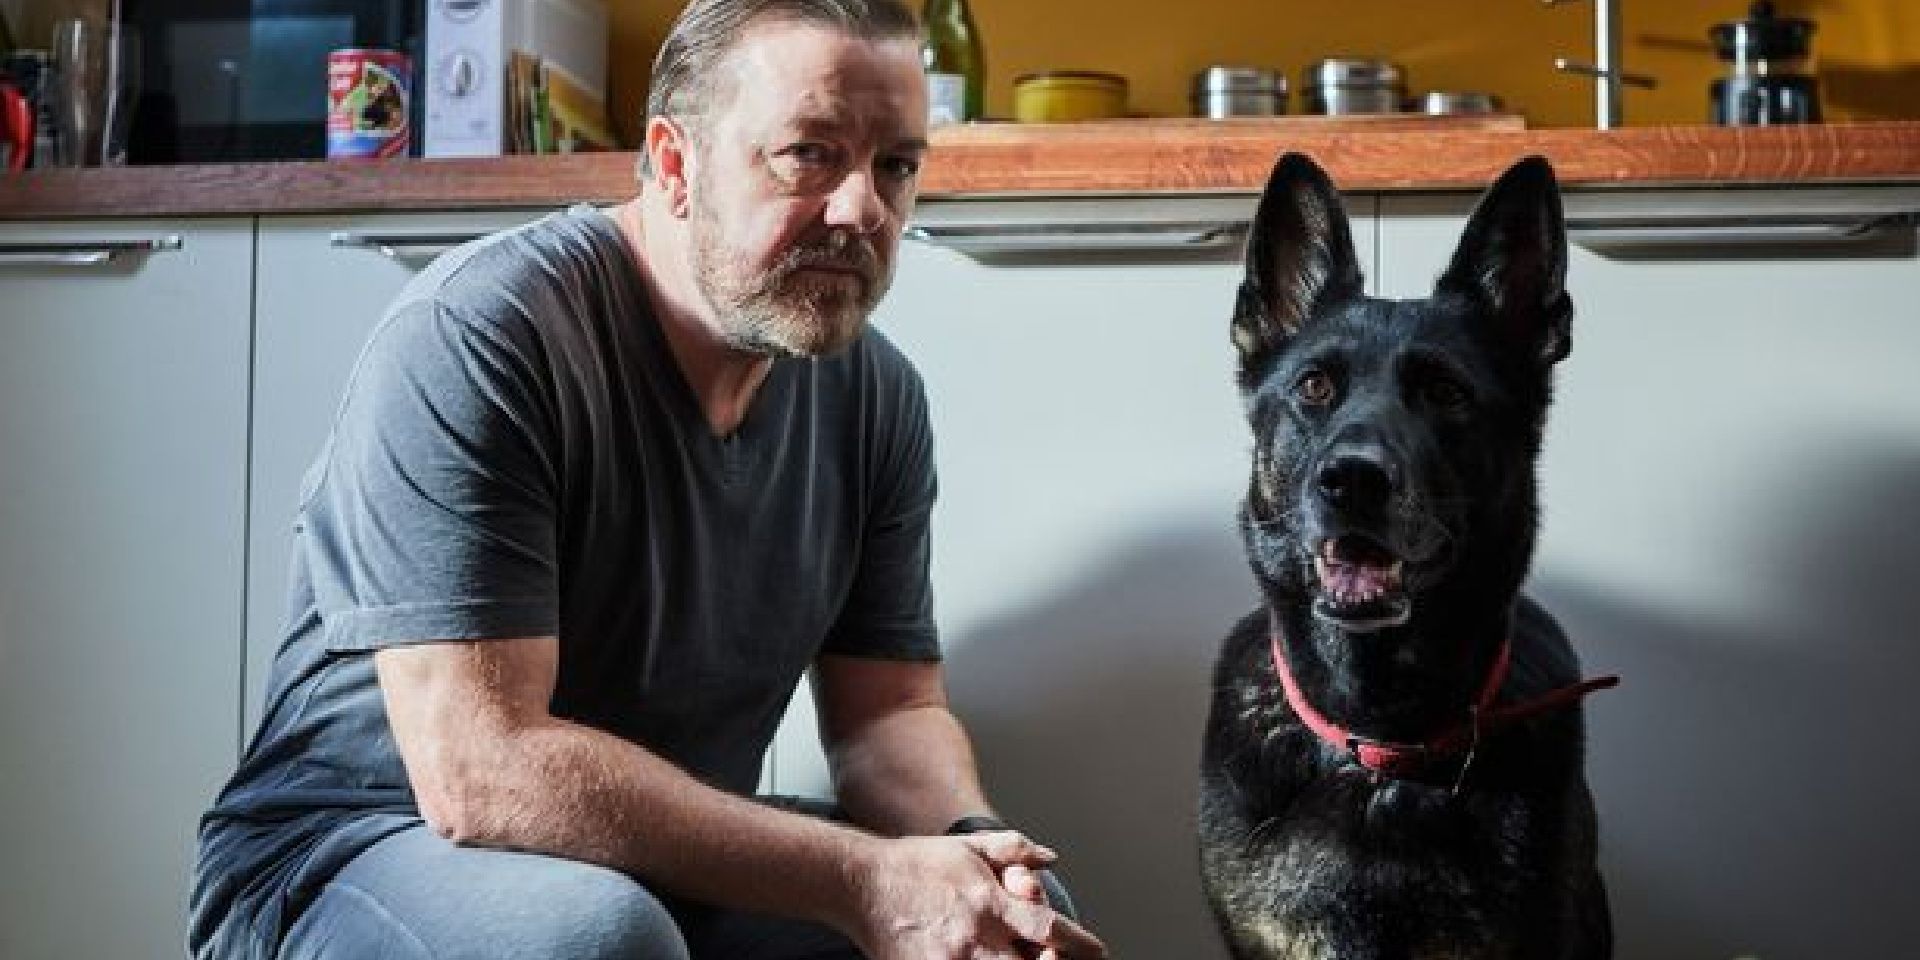 Ricky Gervais as Tony and his dog Brandi sit on the couch in Afterlife.